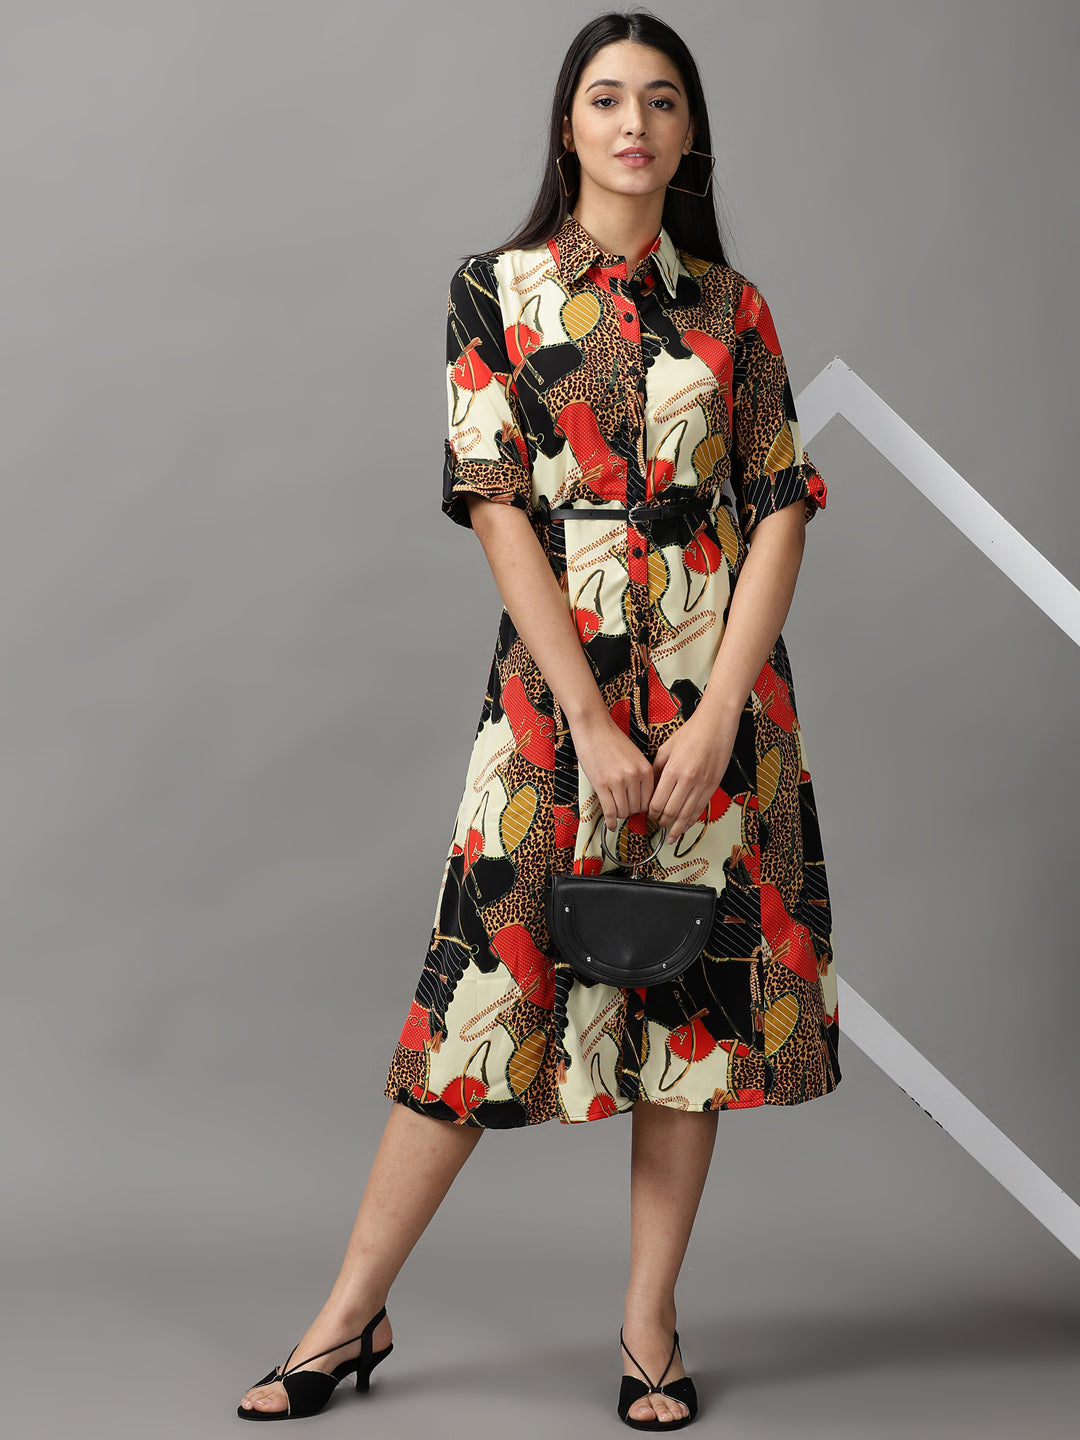 Women's Multi Floral Fit and Flare Dress